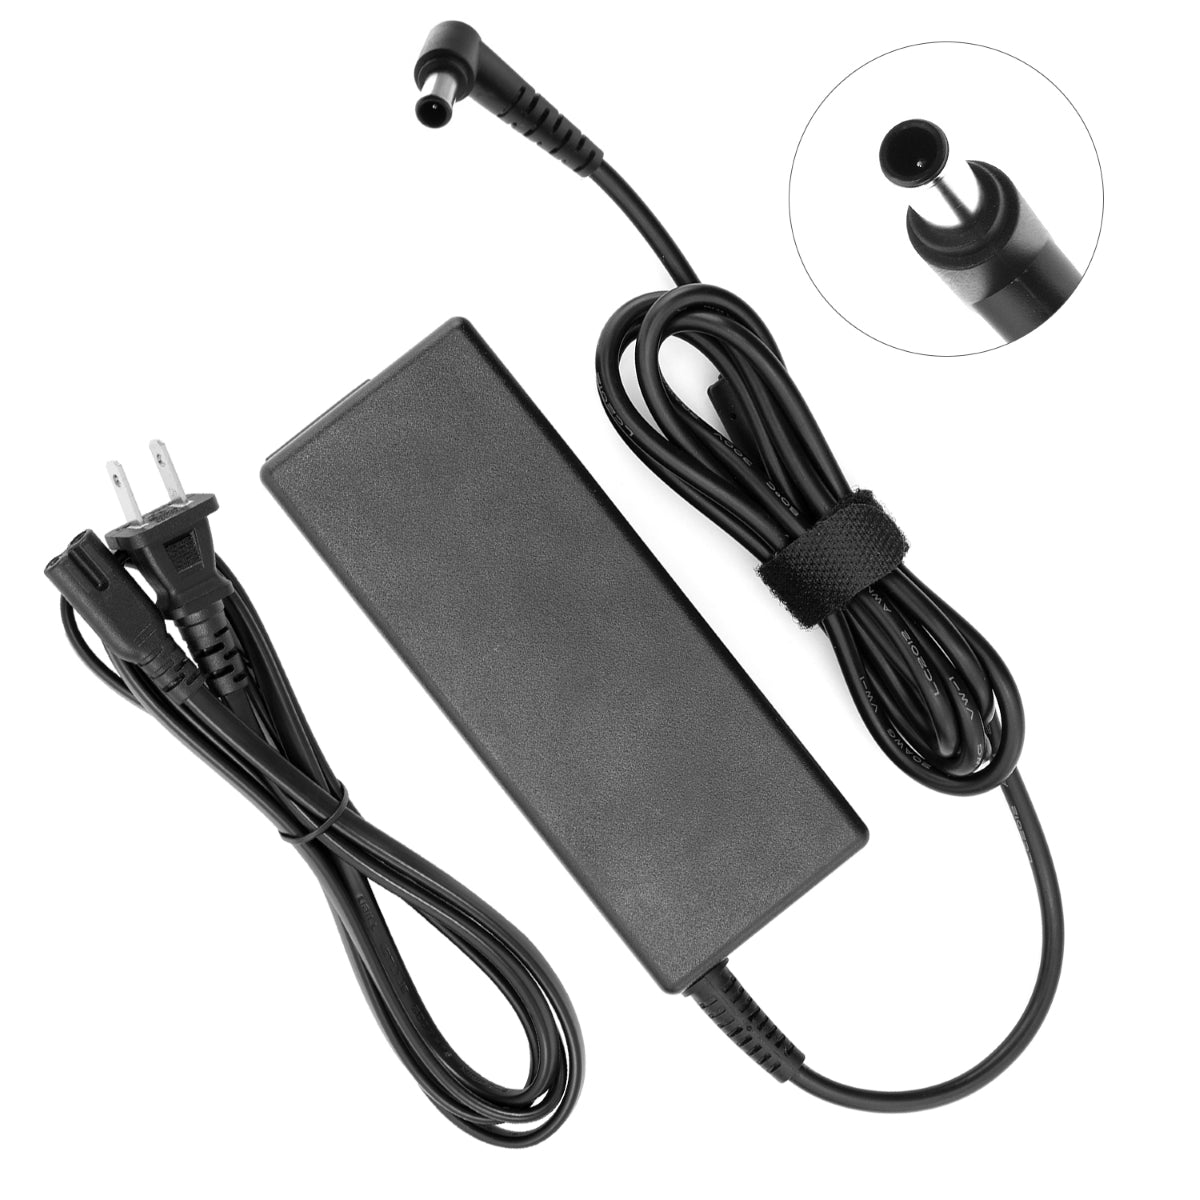 AC Adapter Power Supply for Samsung LTM1555 LCD TV Monitor